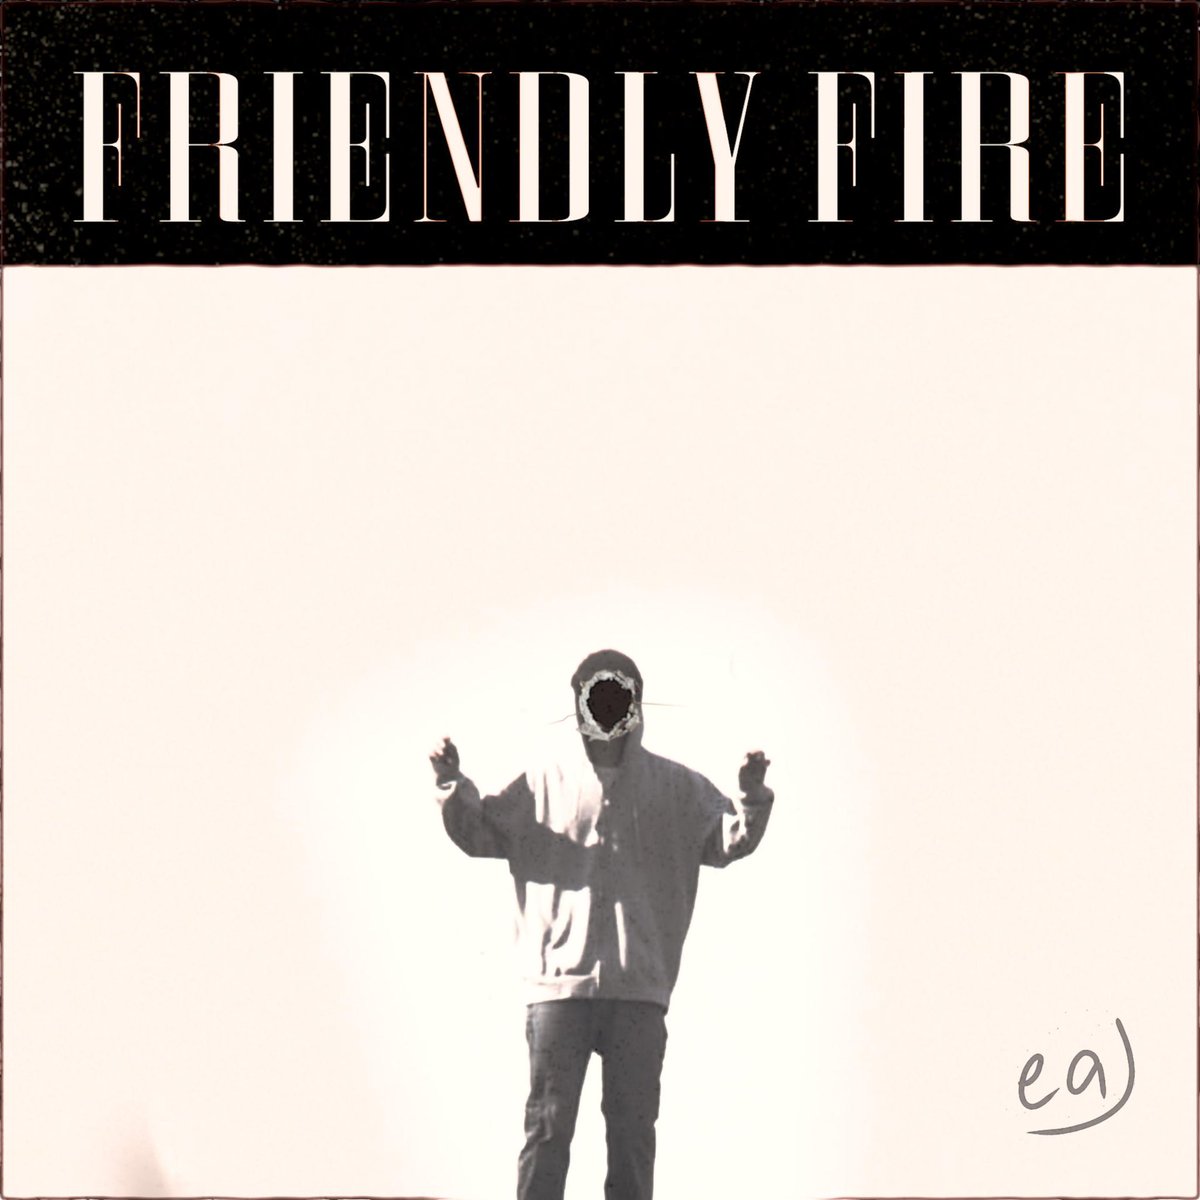 #GeniusCharts | “Friendly Fire” by eaJ (@eaJPark) debuts at #5 on the daily K-Global chart in Genius Korea! It becomes his third Top 5 hit on this chart following “mad” and “everything, everywhere” with vaultboy! genius.com/Eaj-friendly-f…